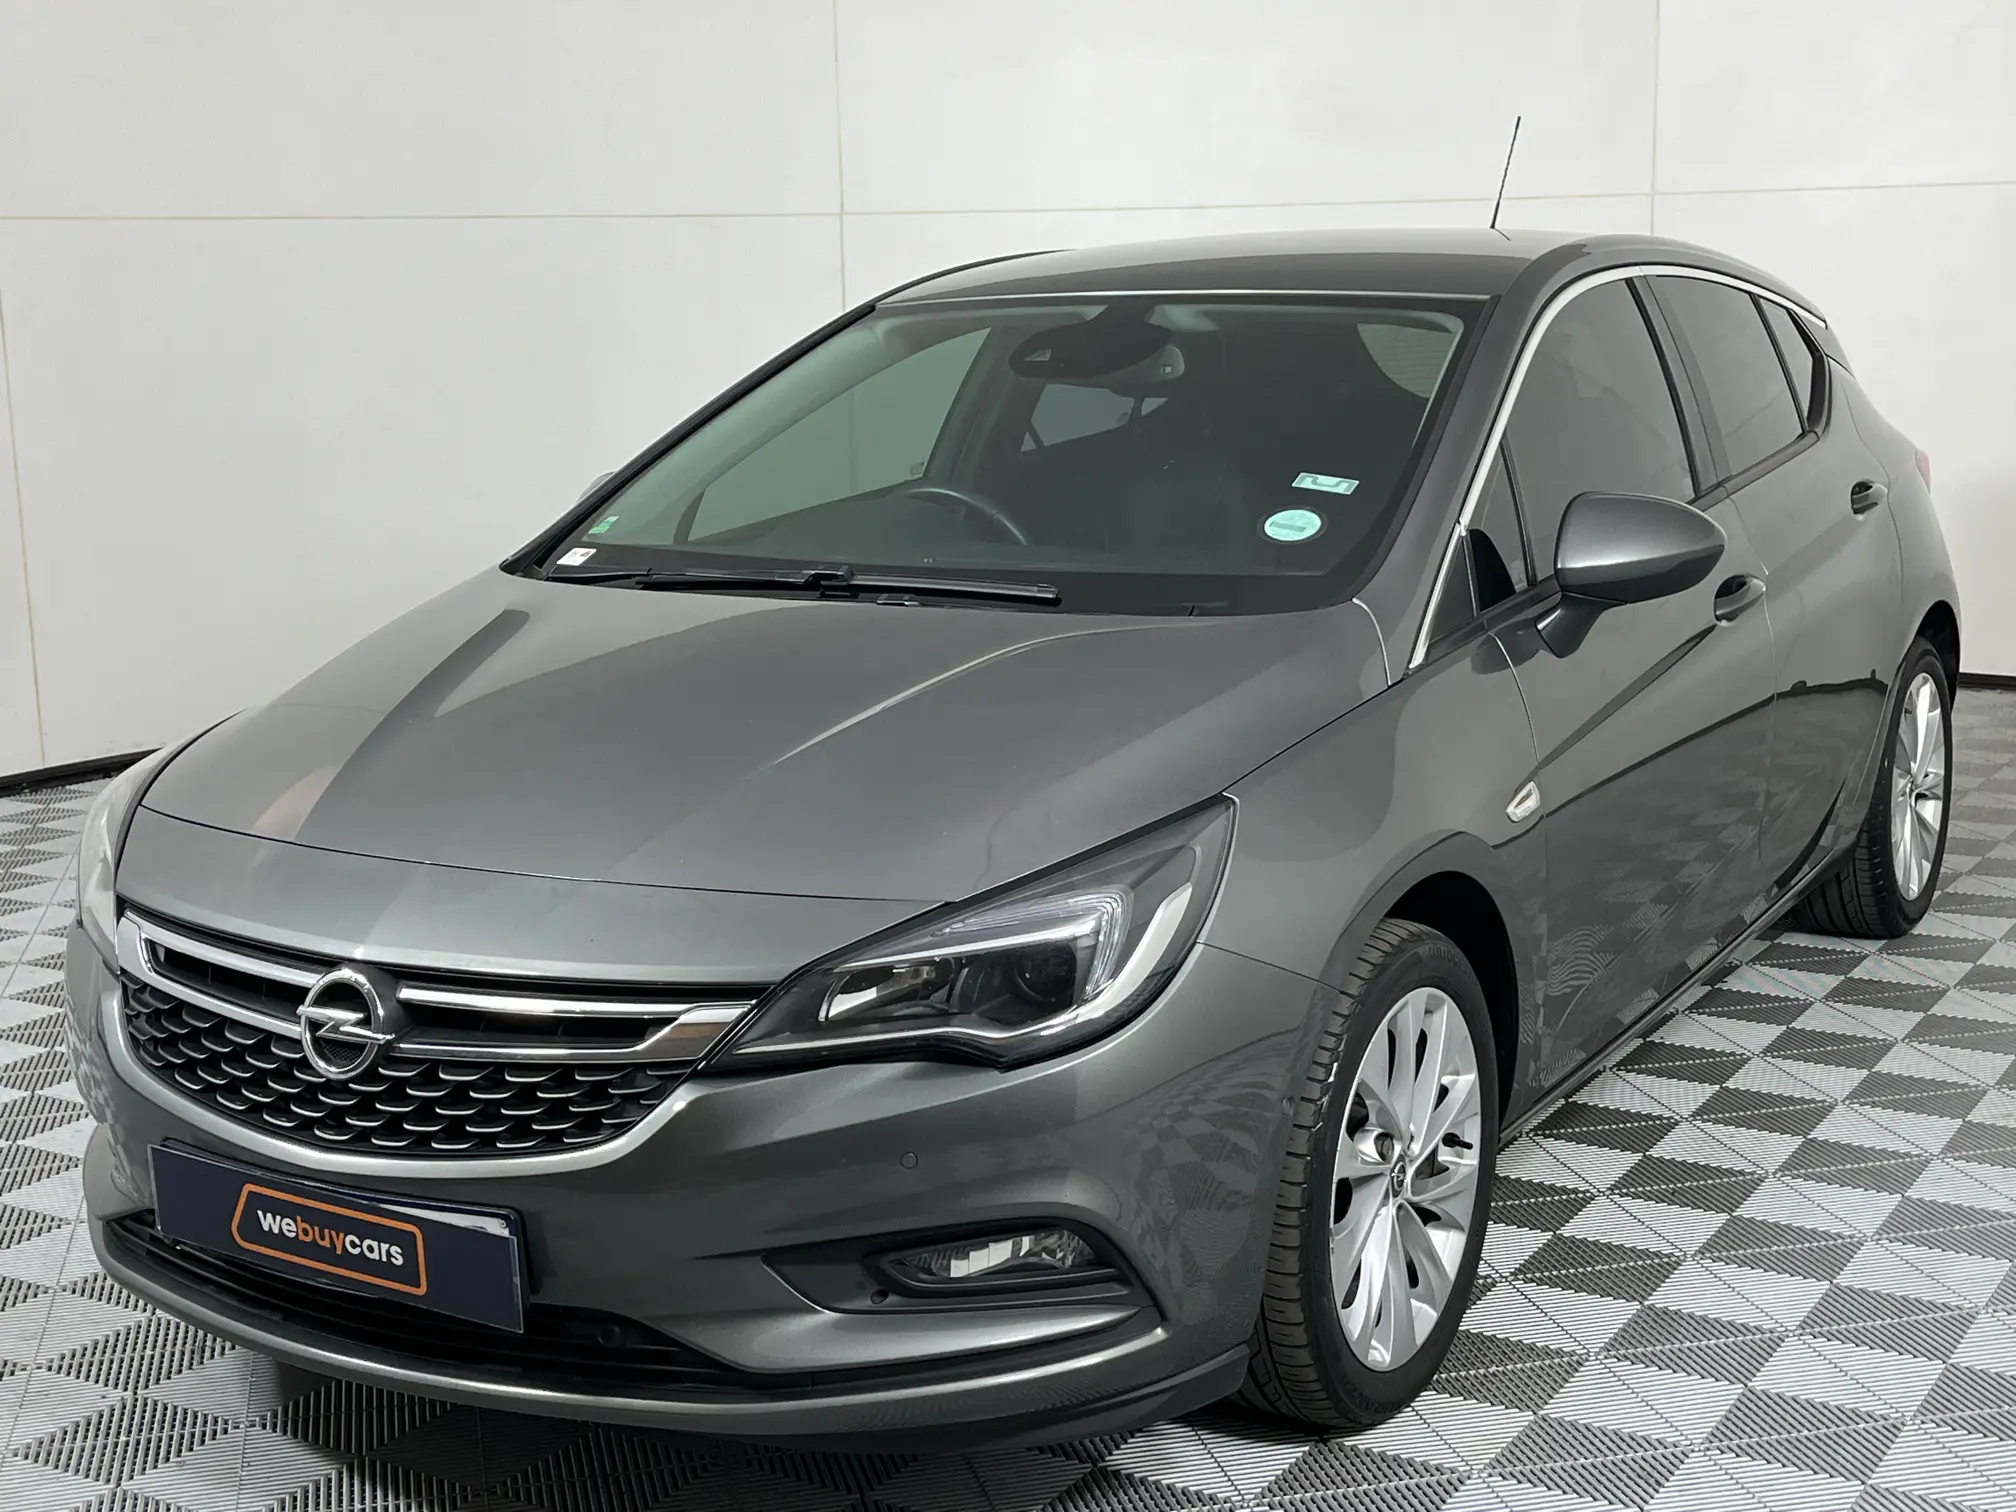 2020 Opel Astra 1.4T Edition Auto (5dr)